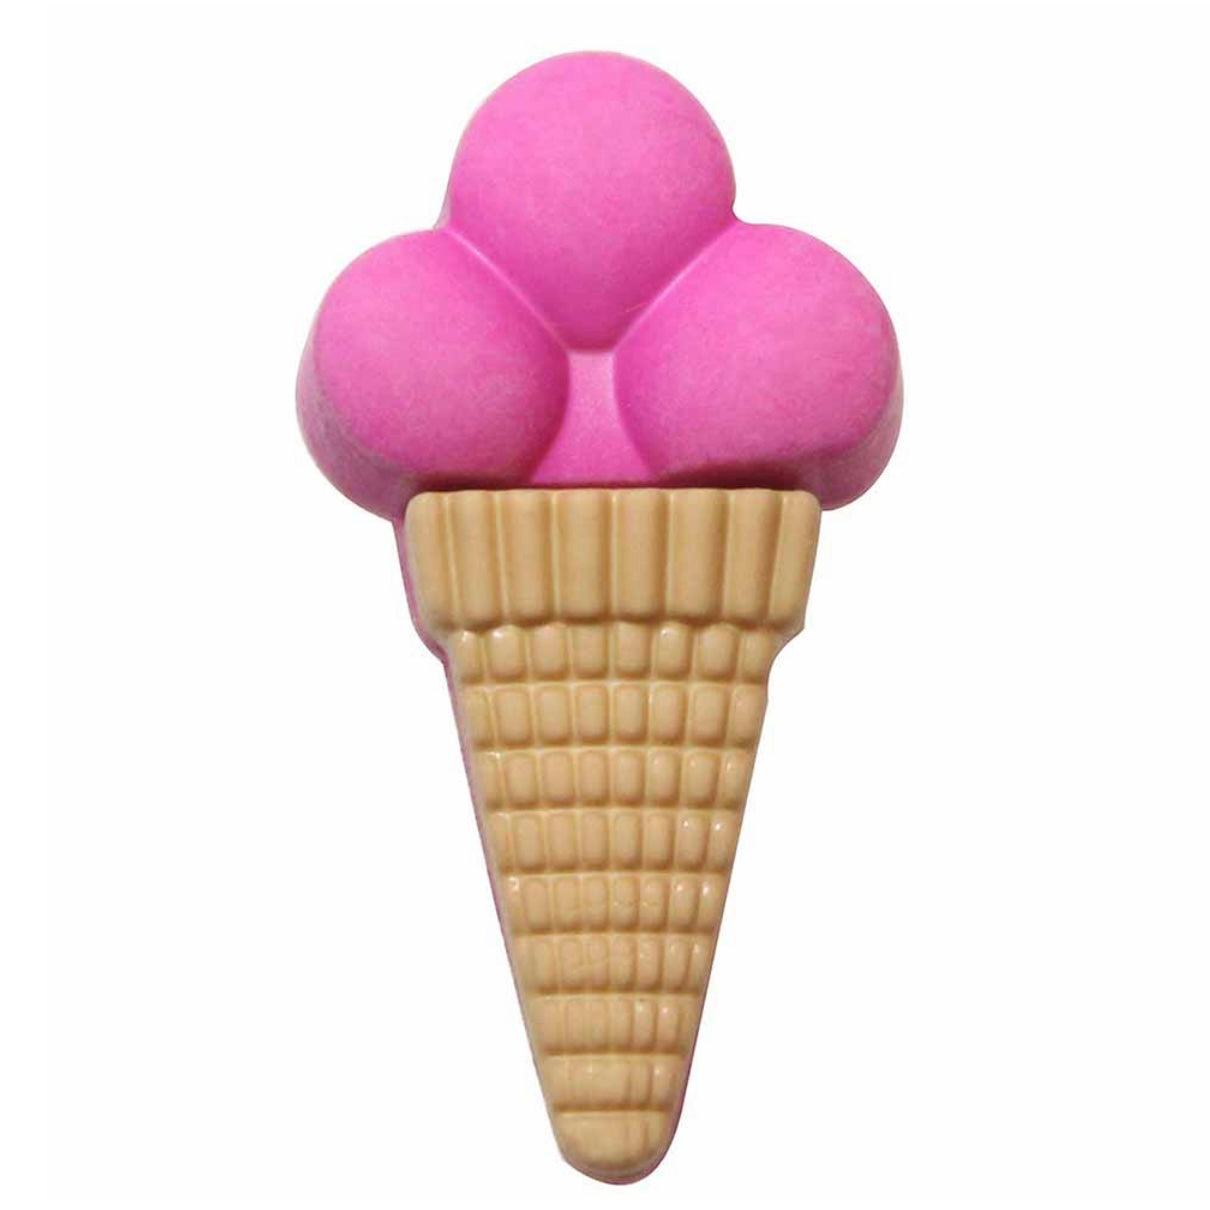 Novelty Shank Button - Ice Cream Cone - Pink - 30mm - 2pcs